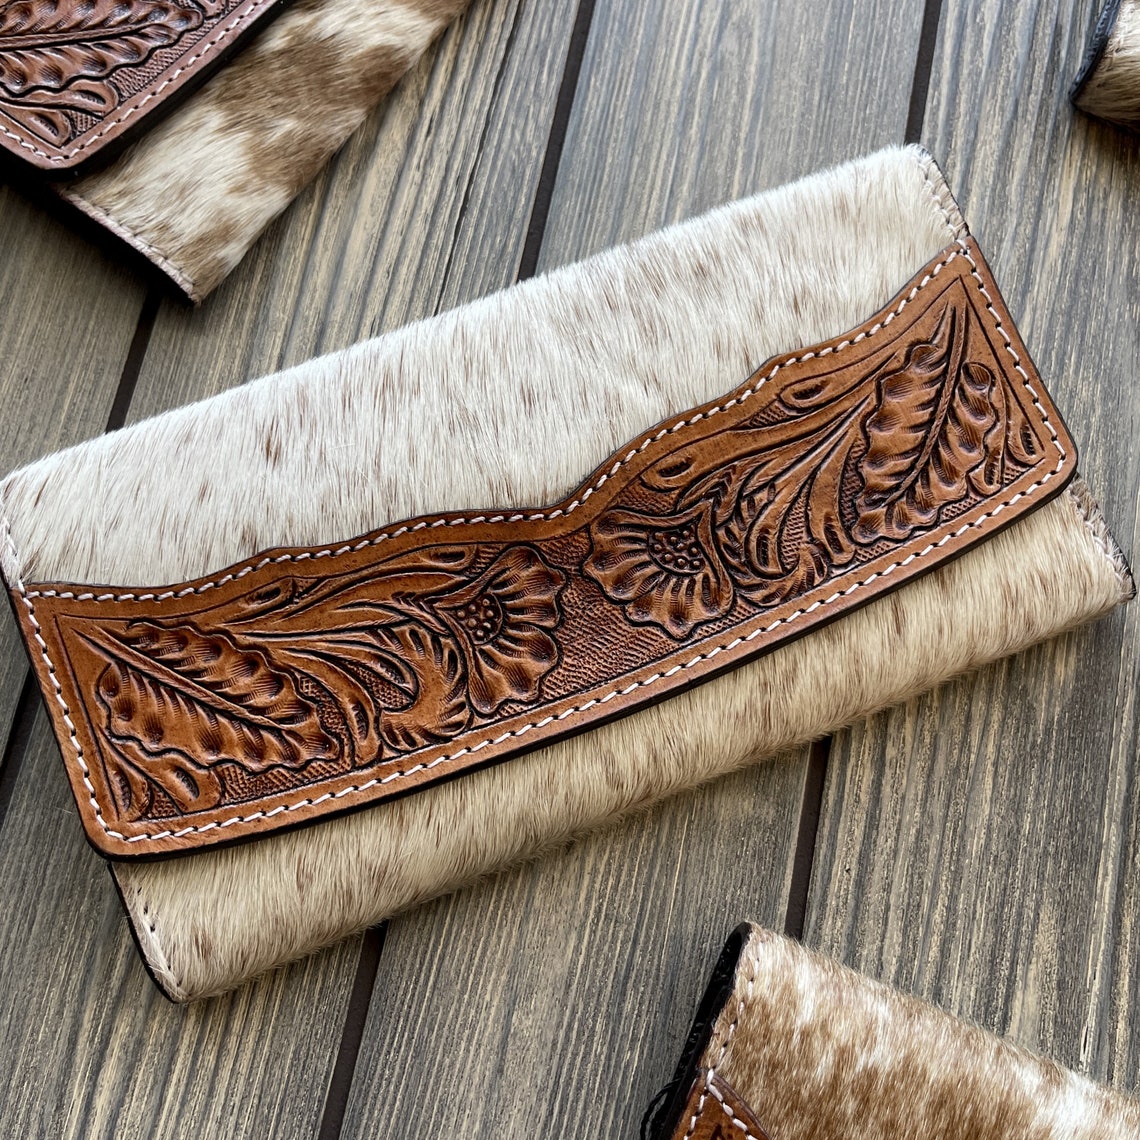 This custom wallet is the perfect choice for any fashion-conscious woman looking for a unique and practical accessory. Made from premium cowhide leather, this western wallet features a beautiful hand-tooled design that's sure to turn heads.